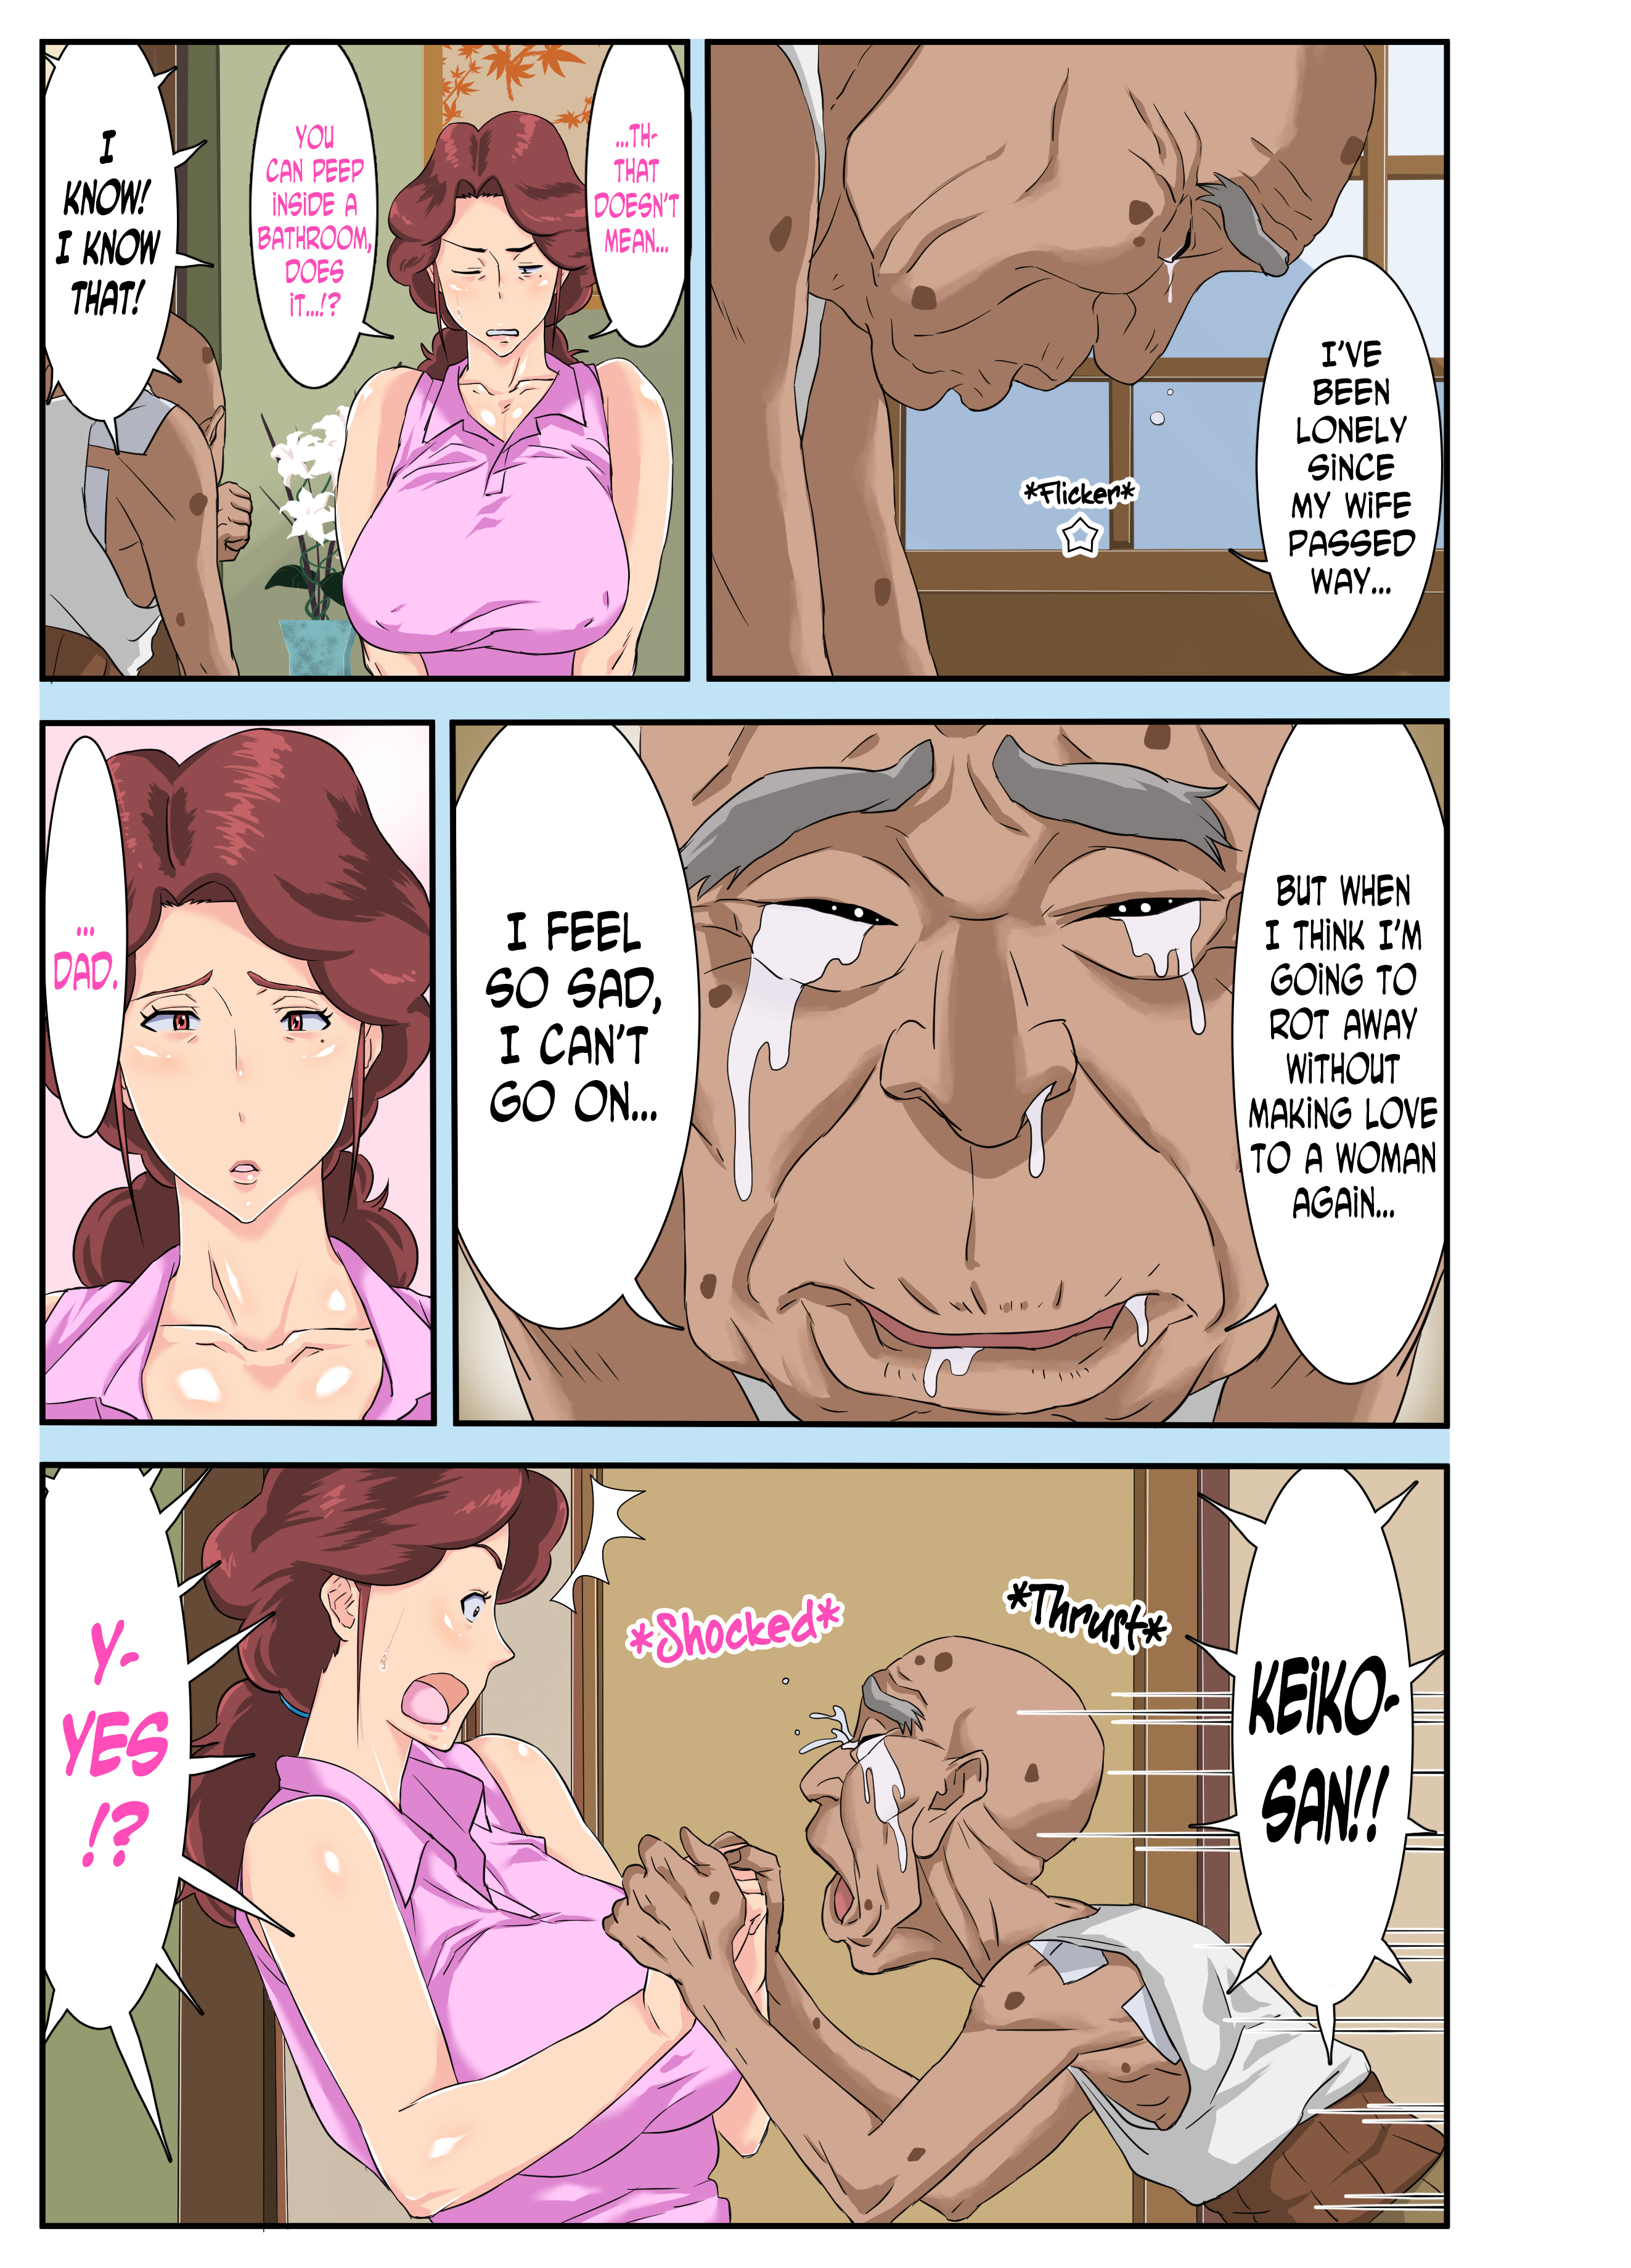 Dirty old man fucks his busty daughter while her husband sleeps - sex comics photo